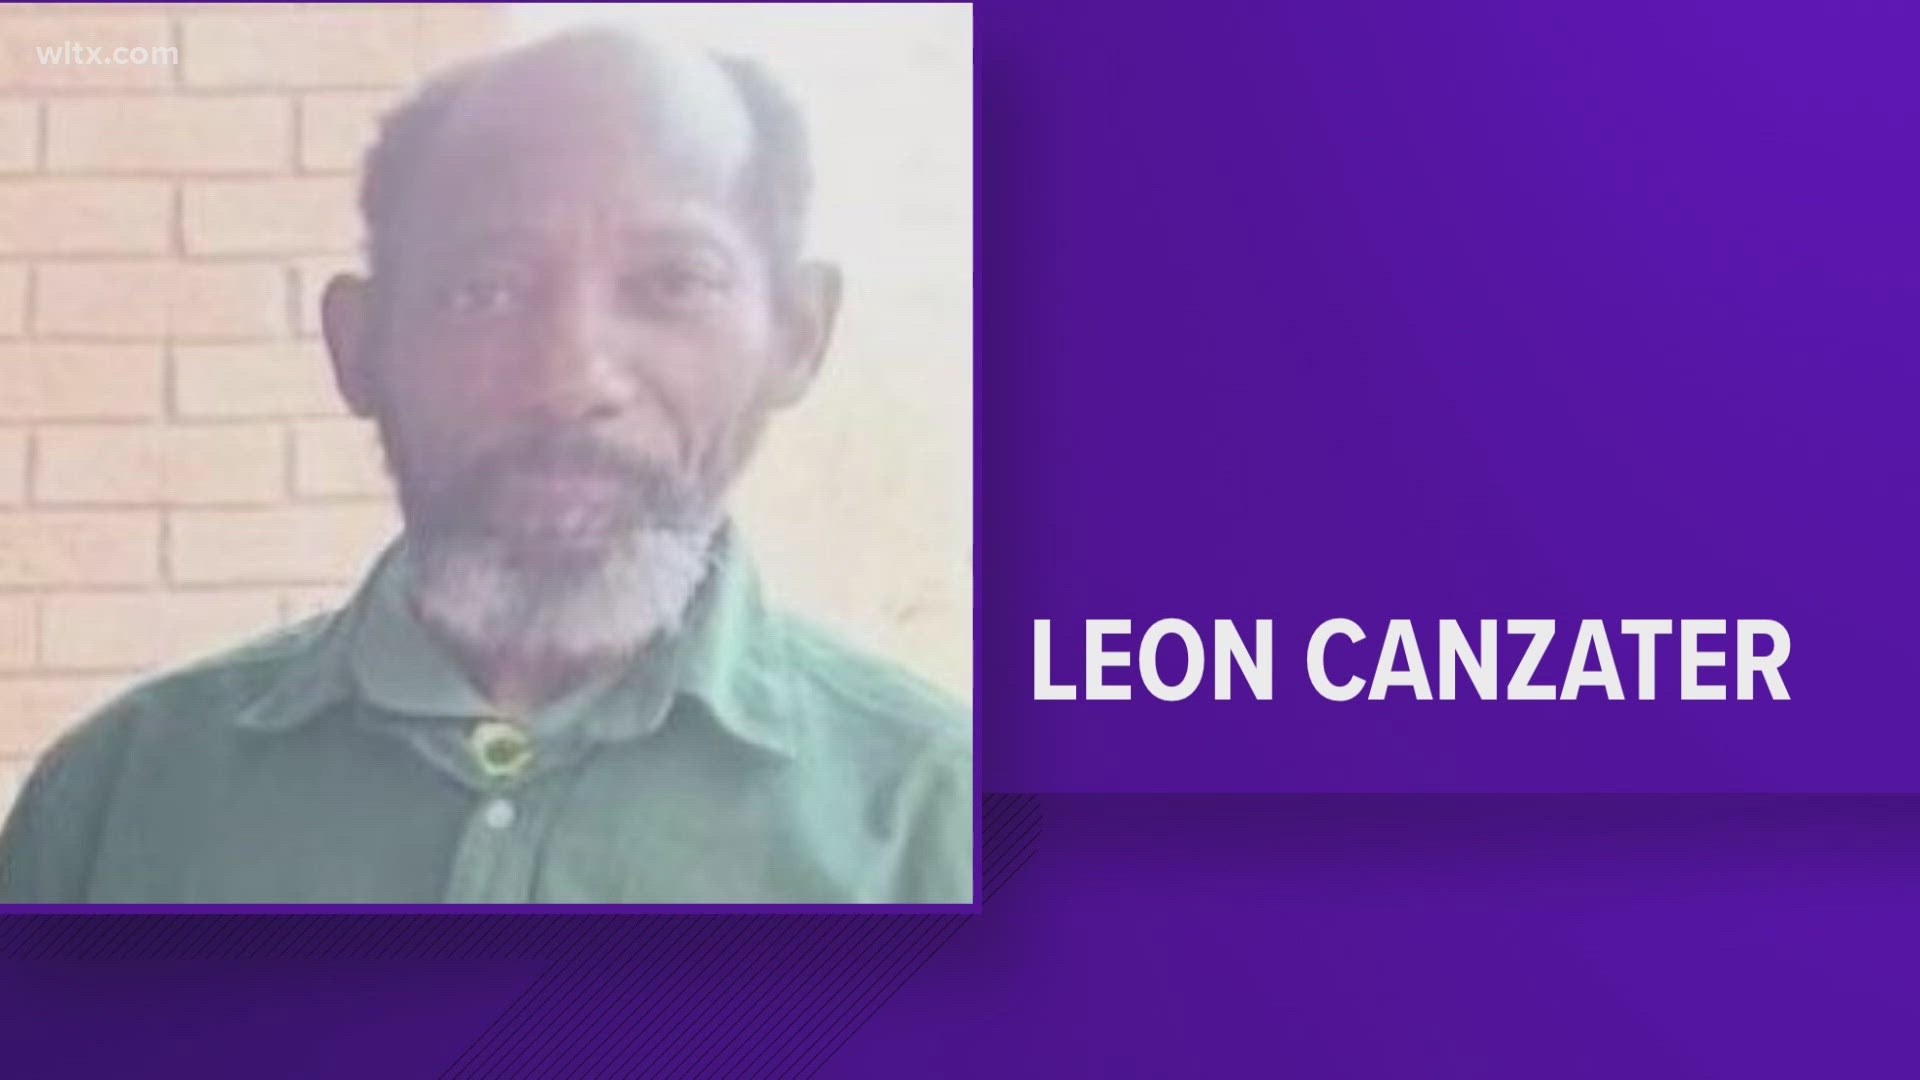 Leon Canzater, 67, is considered endangered and missing from his home on Lakeland Drive.